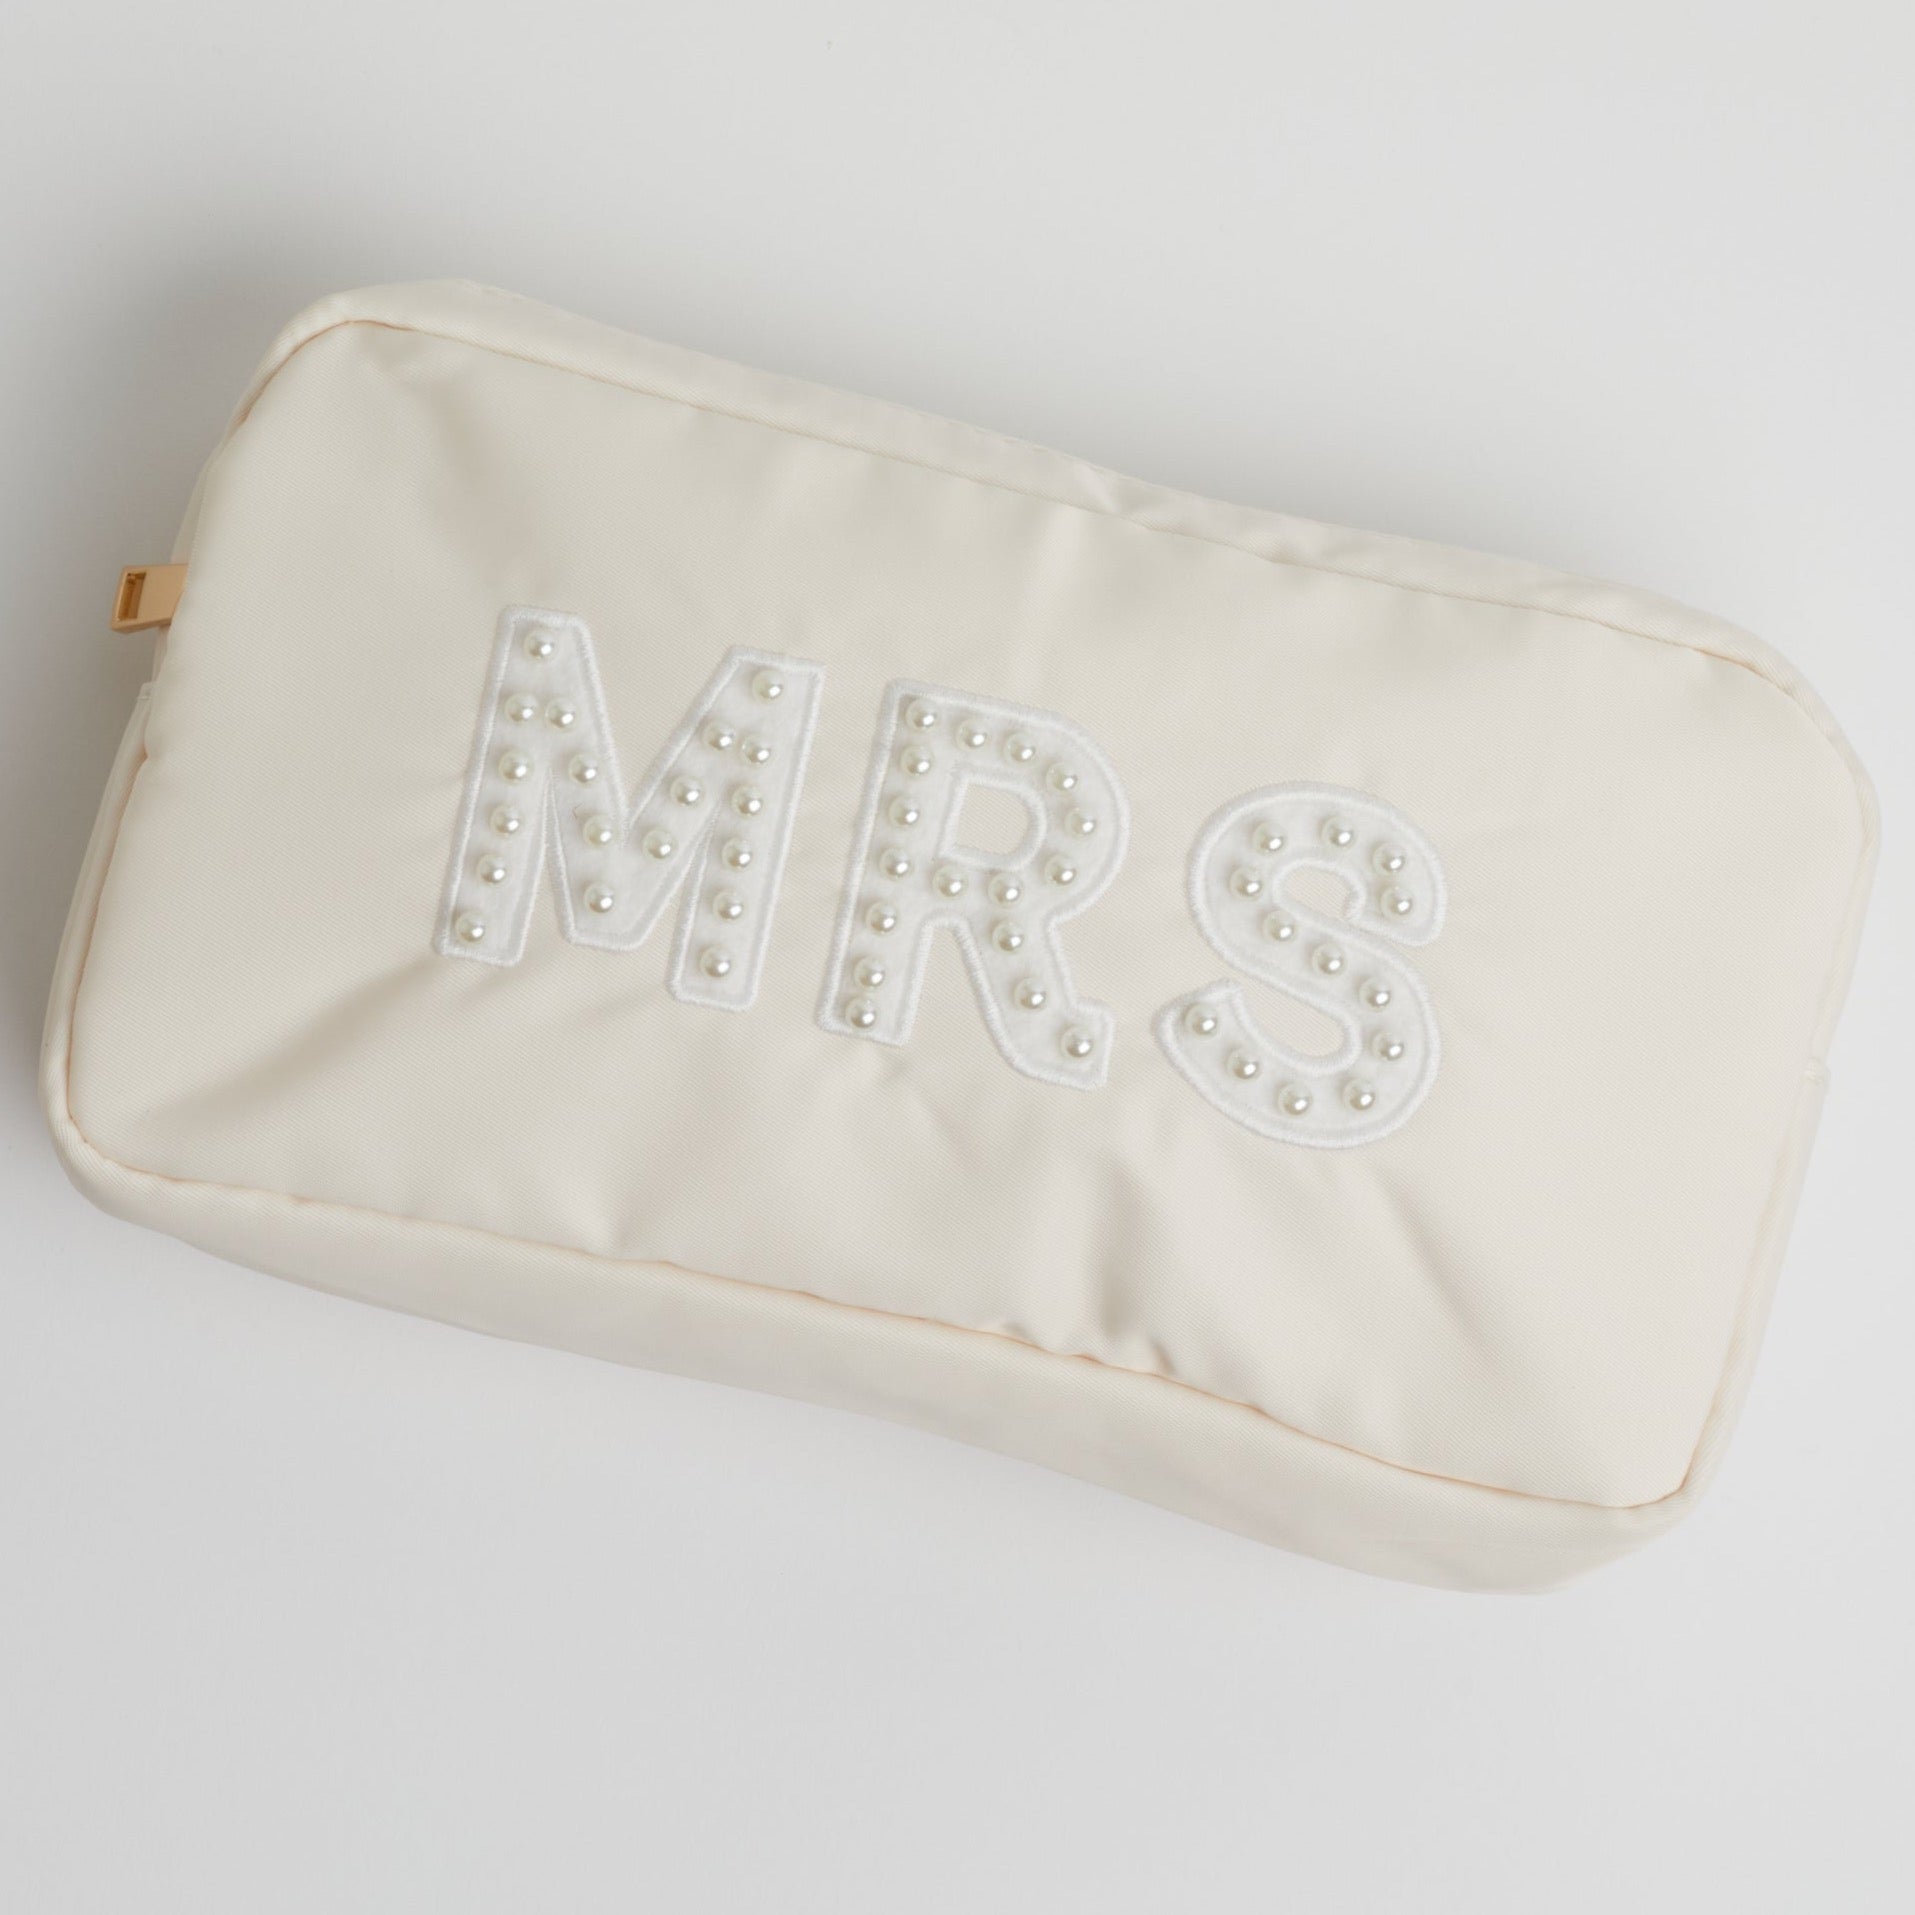 A pearl embroidered nude-colored MRS pouch on a white background